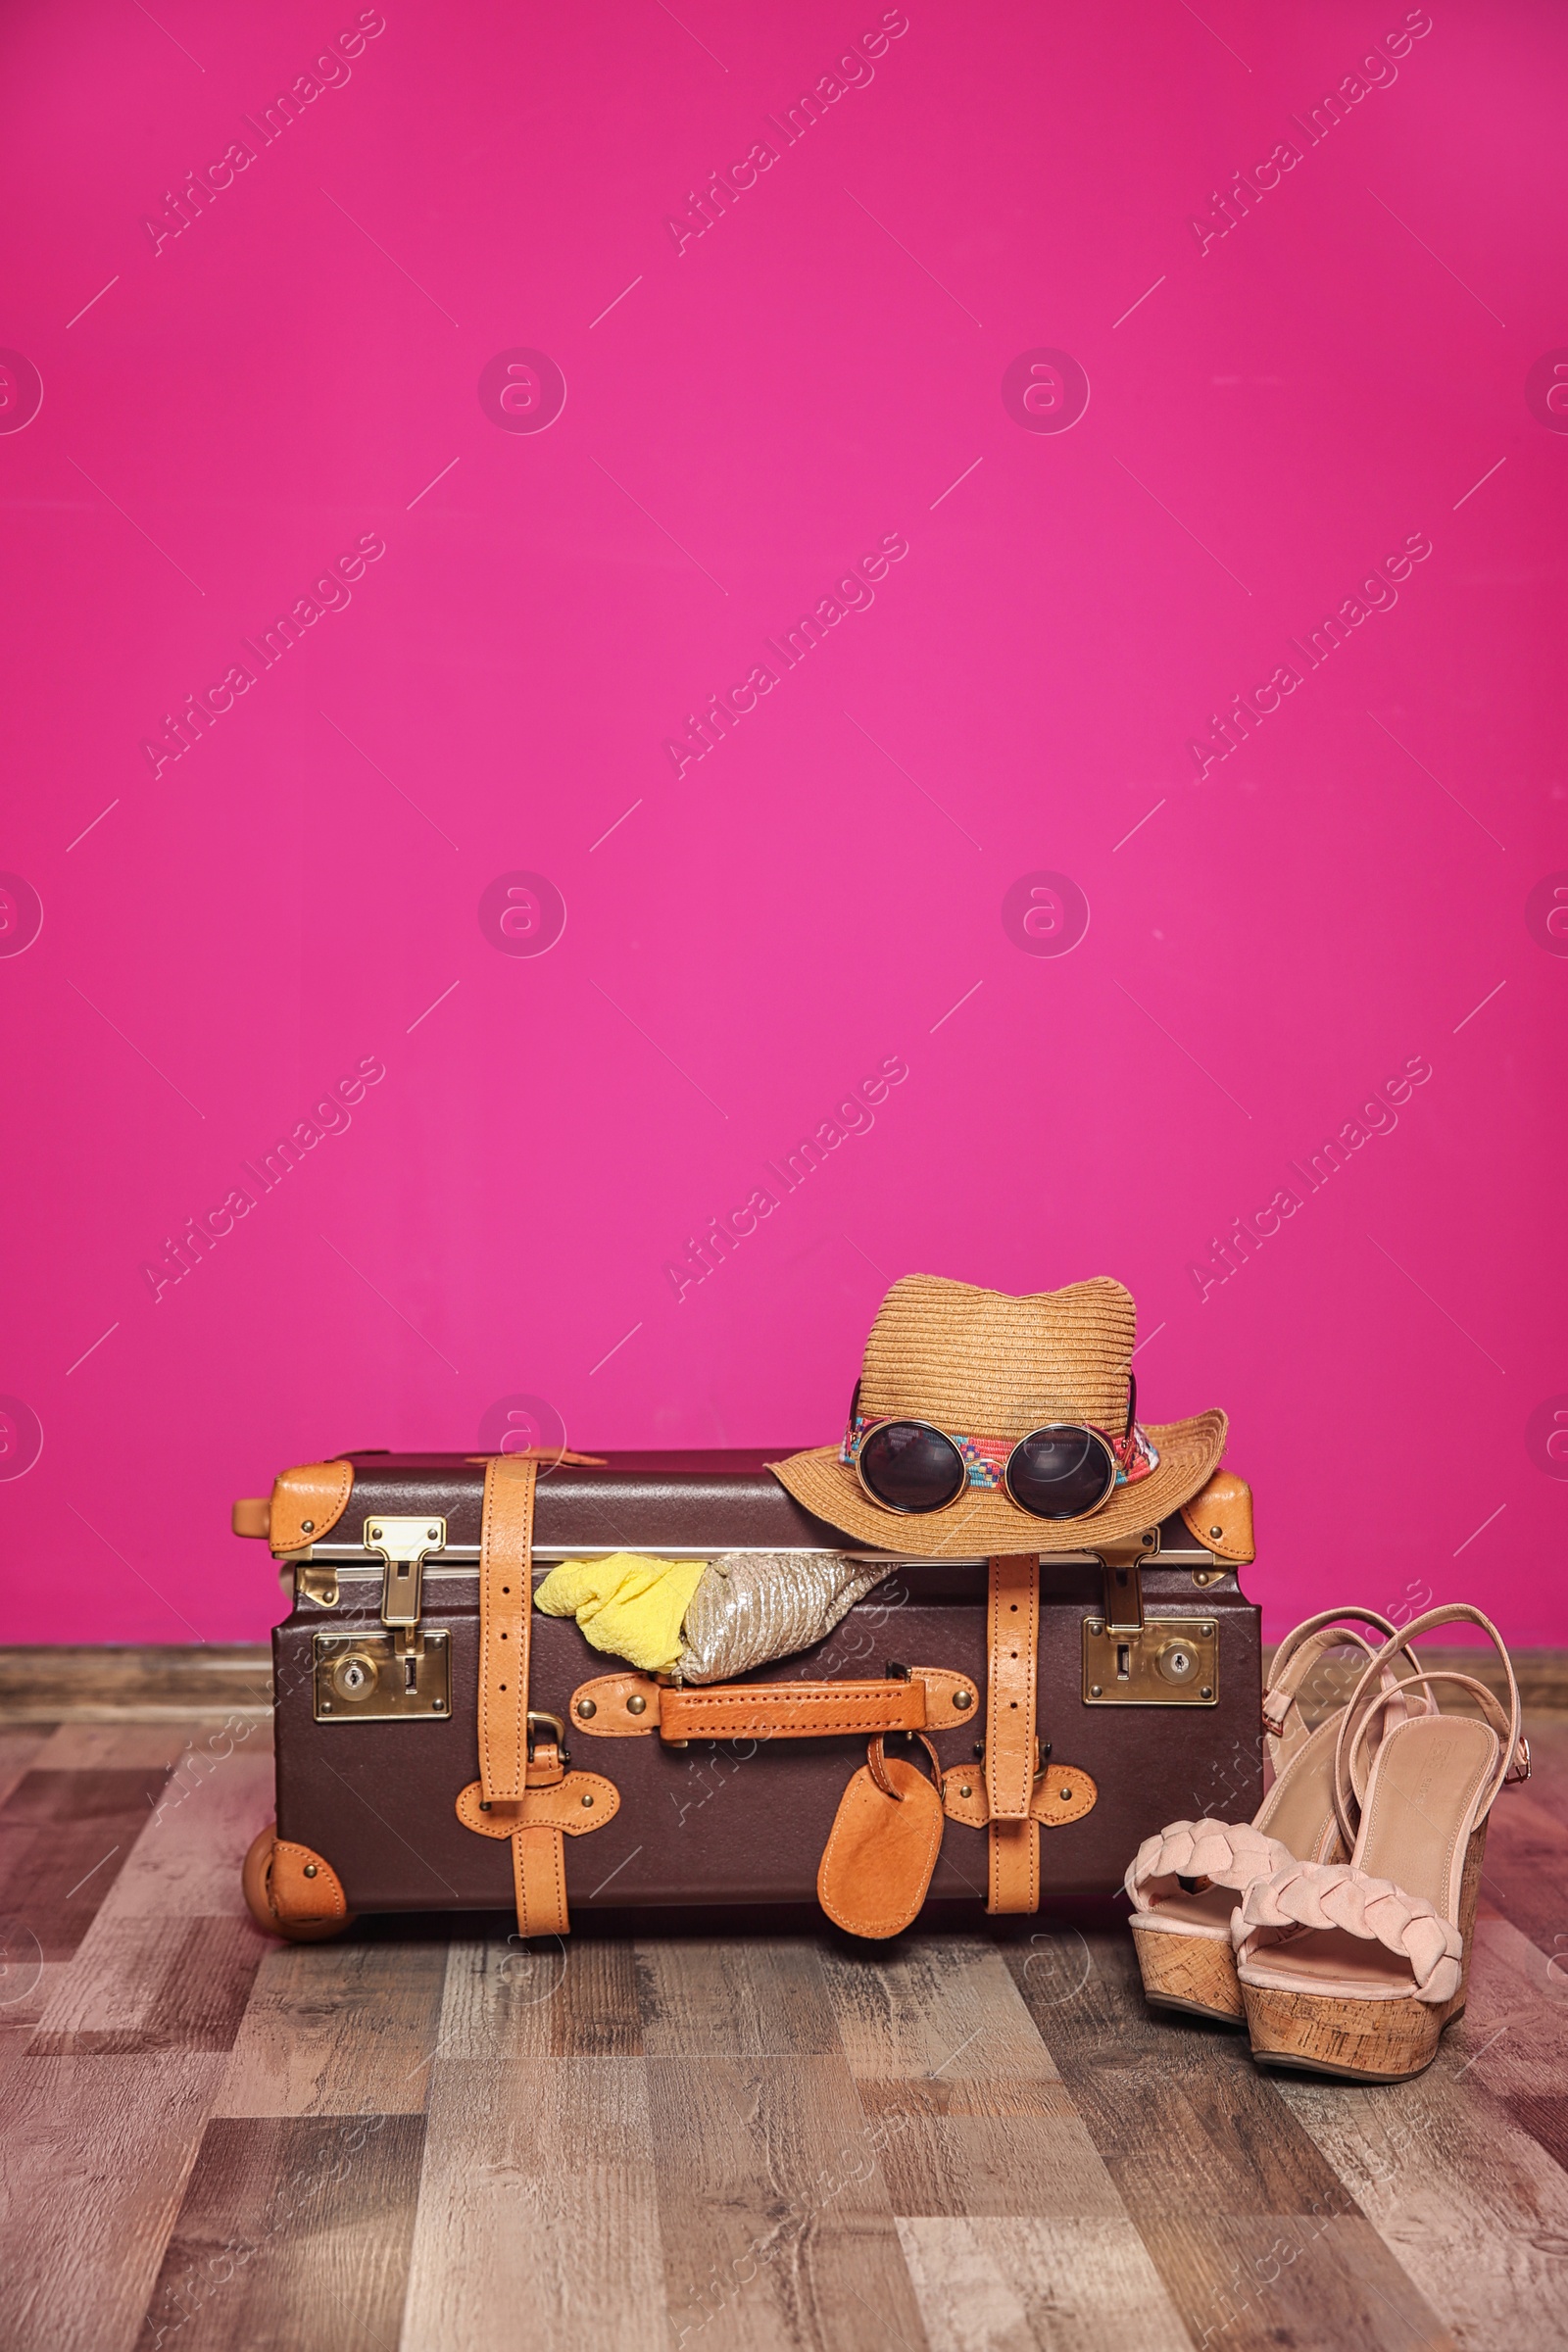 Photo of Suitcase packed for summer journey on floor near color wall